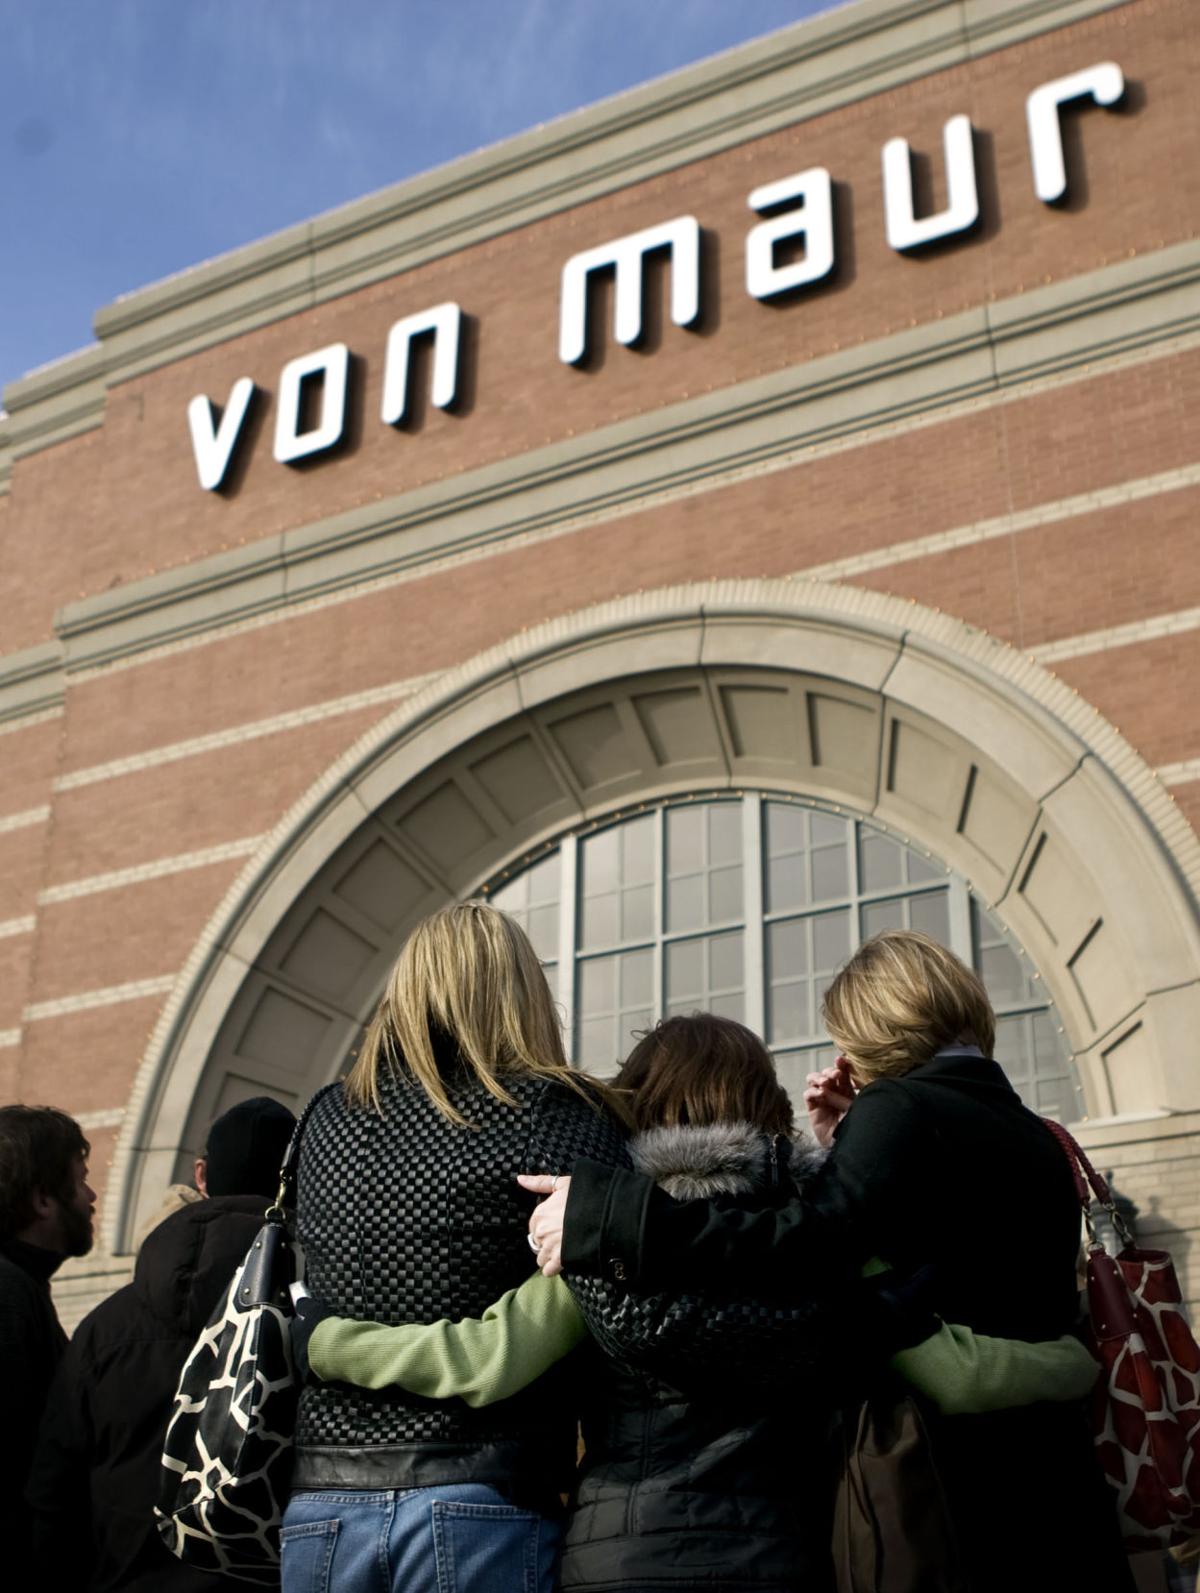 Amid grieving, healing begins after Von Maur shooting